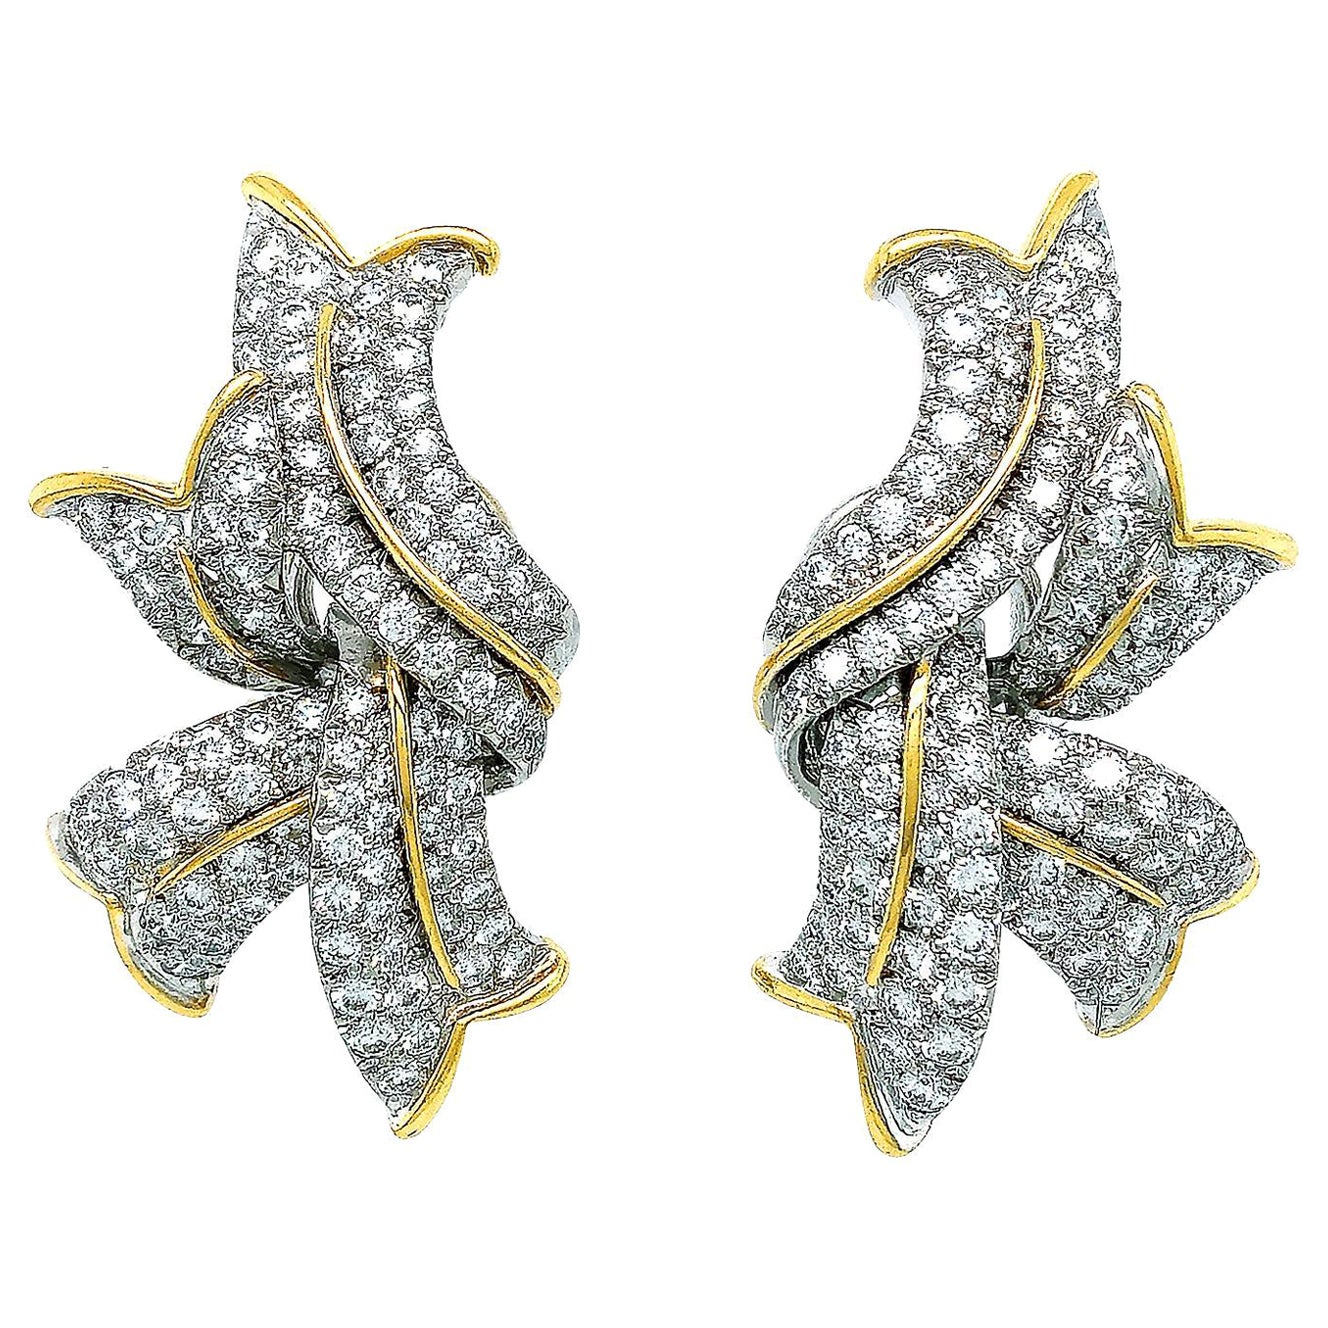 18K Yellow Gold and Platinum Diamond Flame Earrings